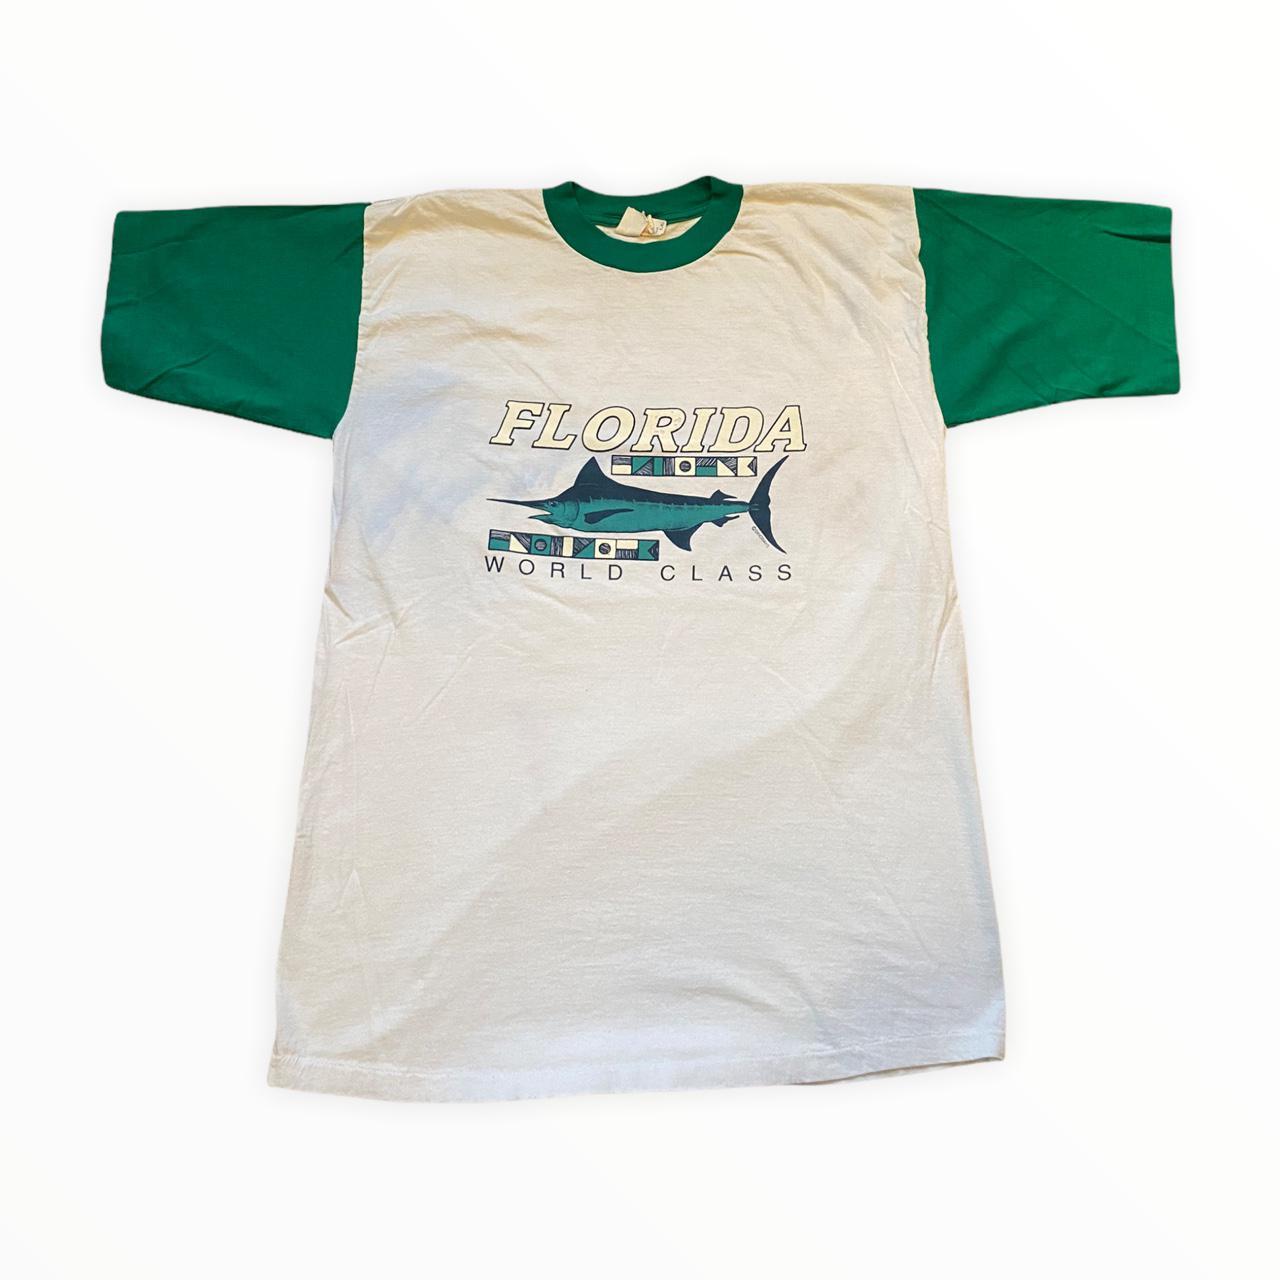 American Vintage Men's White and Green T-shirt